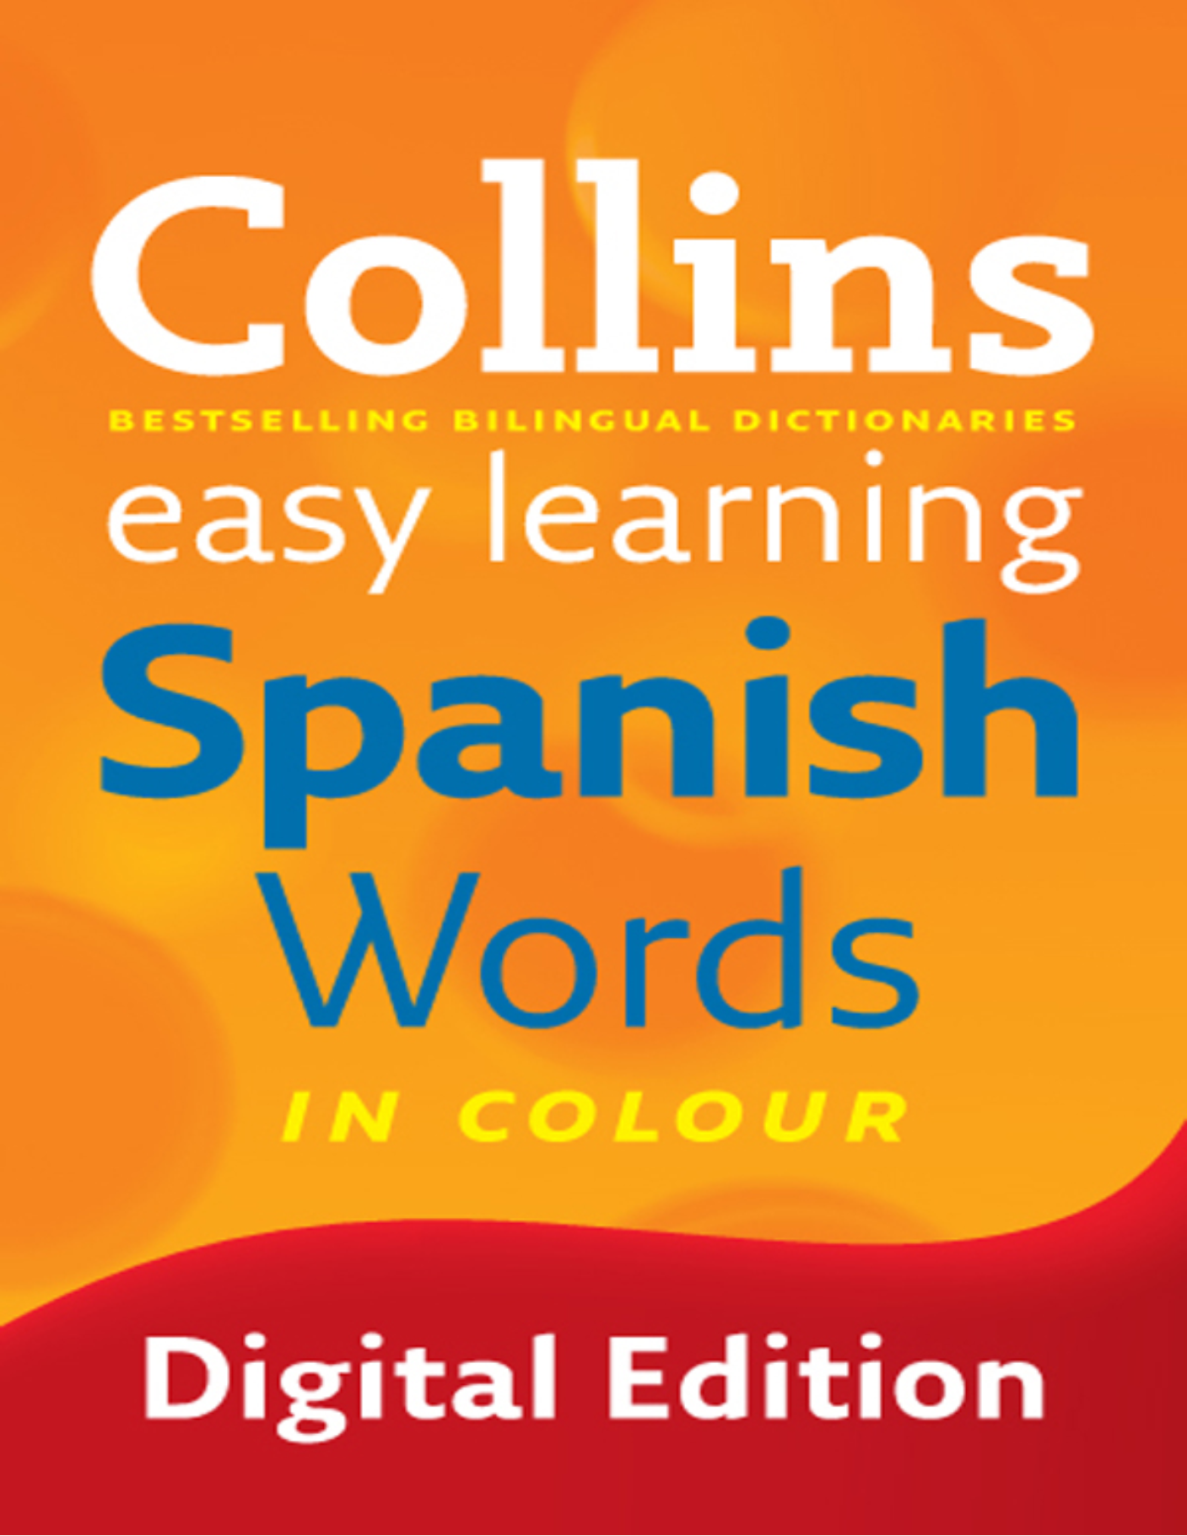 Rich results on Google's SERP when searching for ''Collins-Easy-Learning-Spanish-Words-Book''